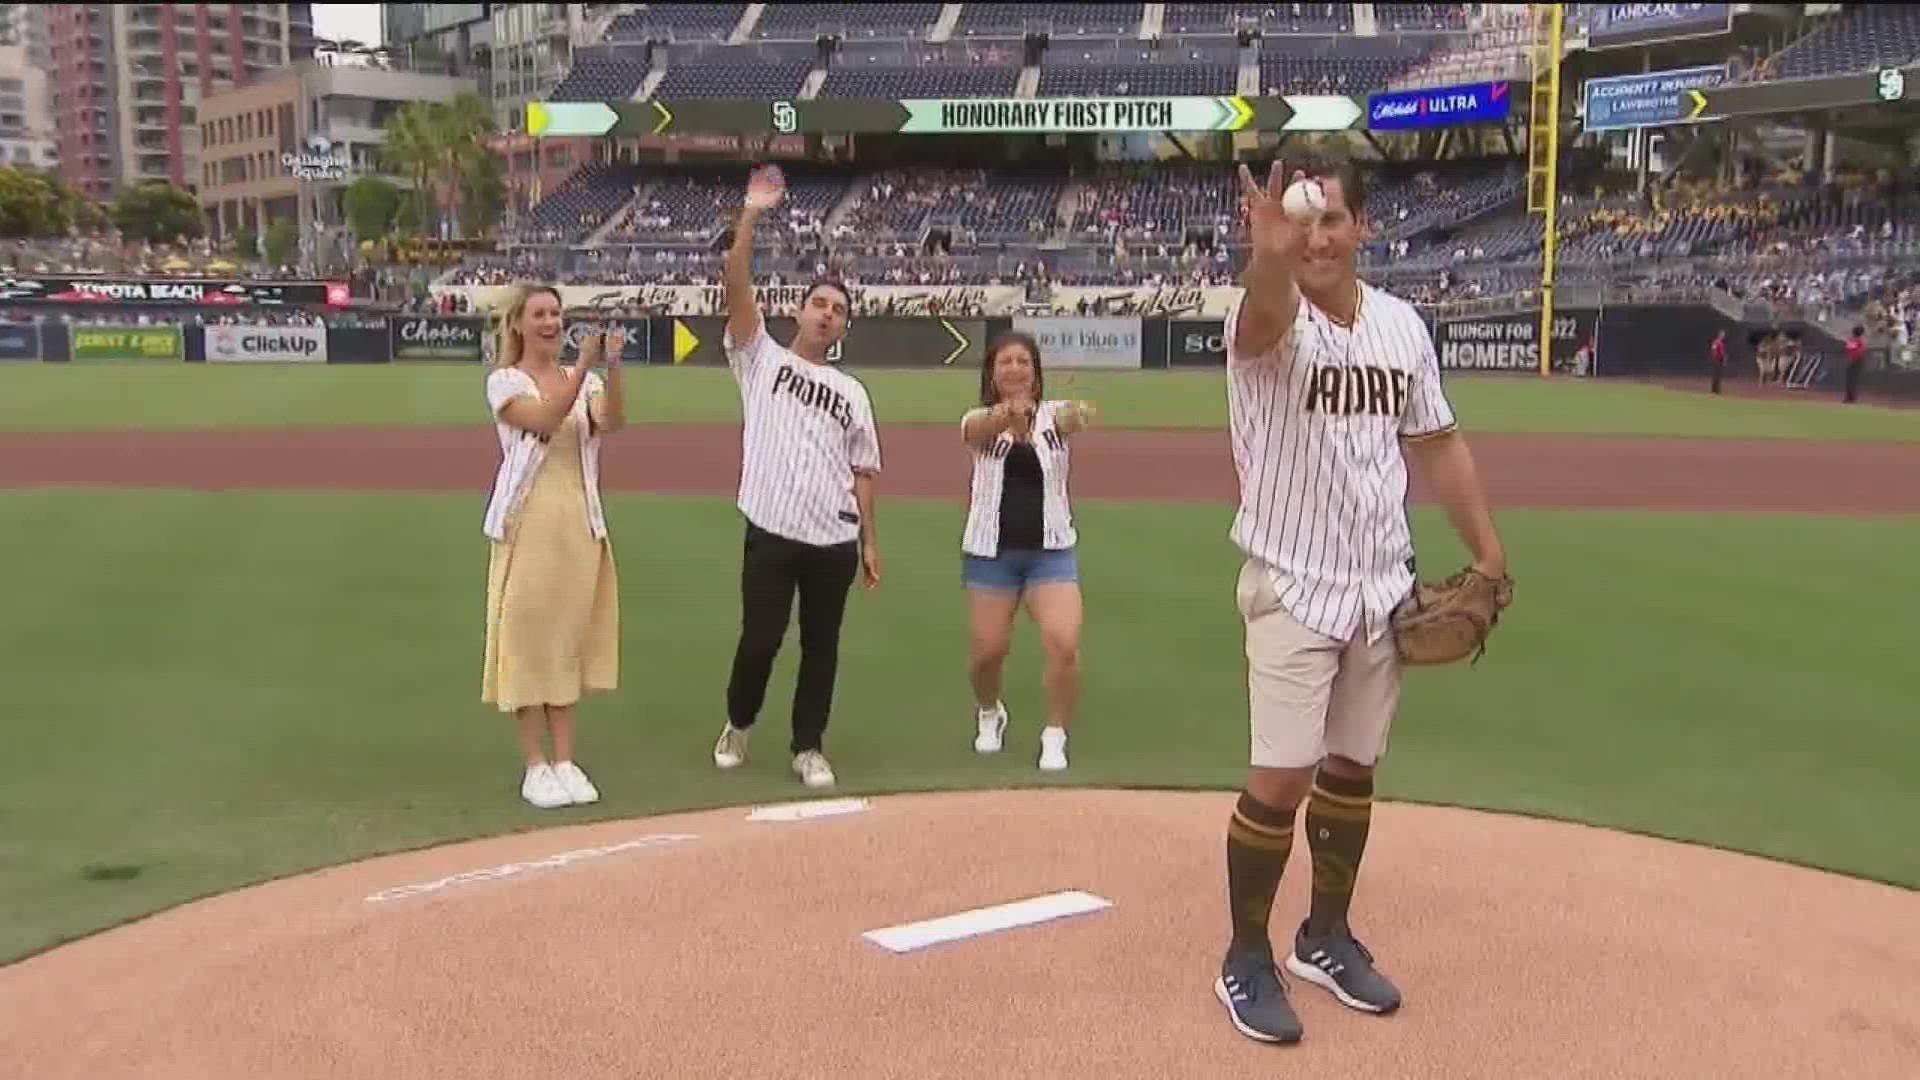 San Diego Padres at Petco Park with CBS 8 Morning Team!